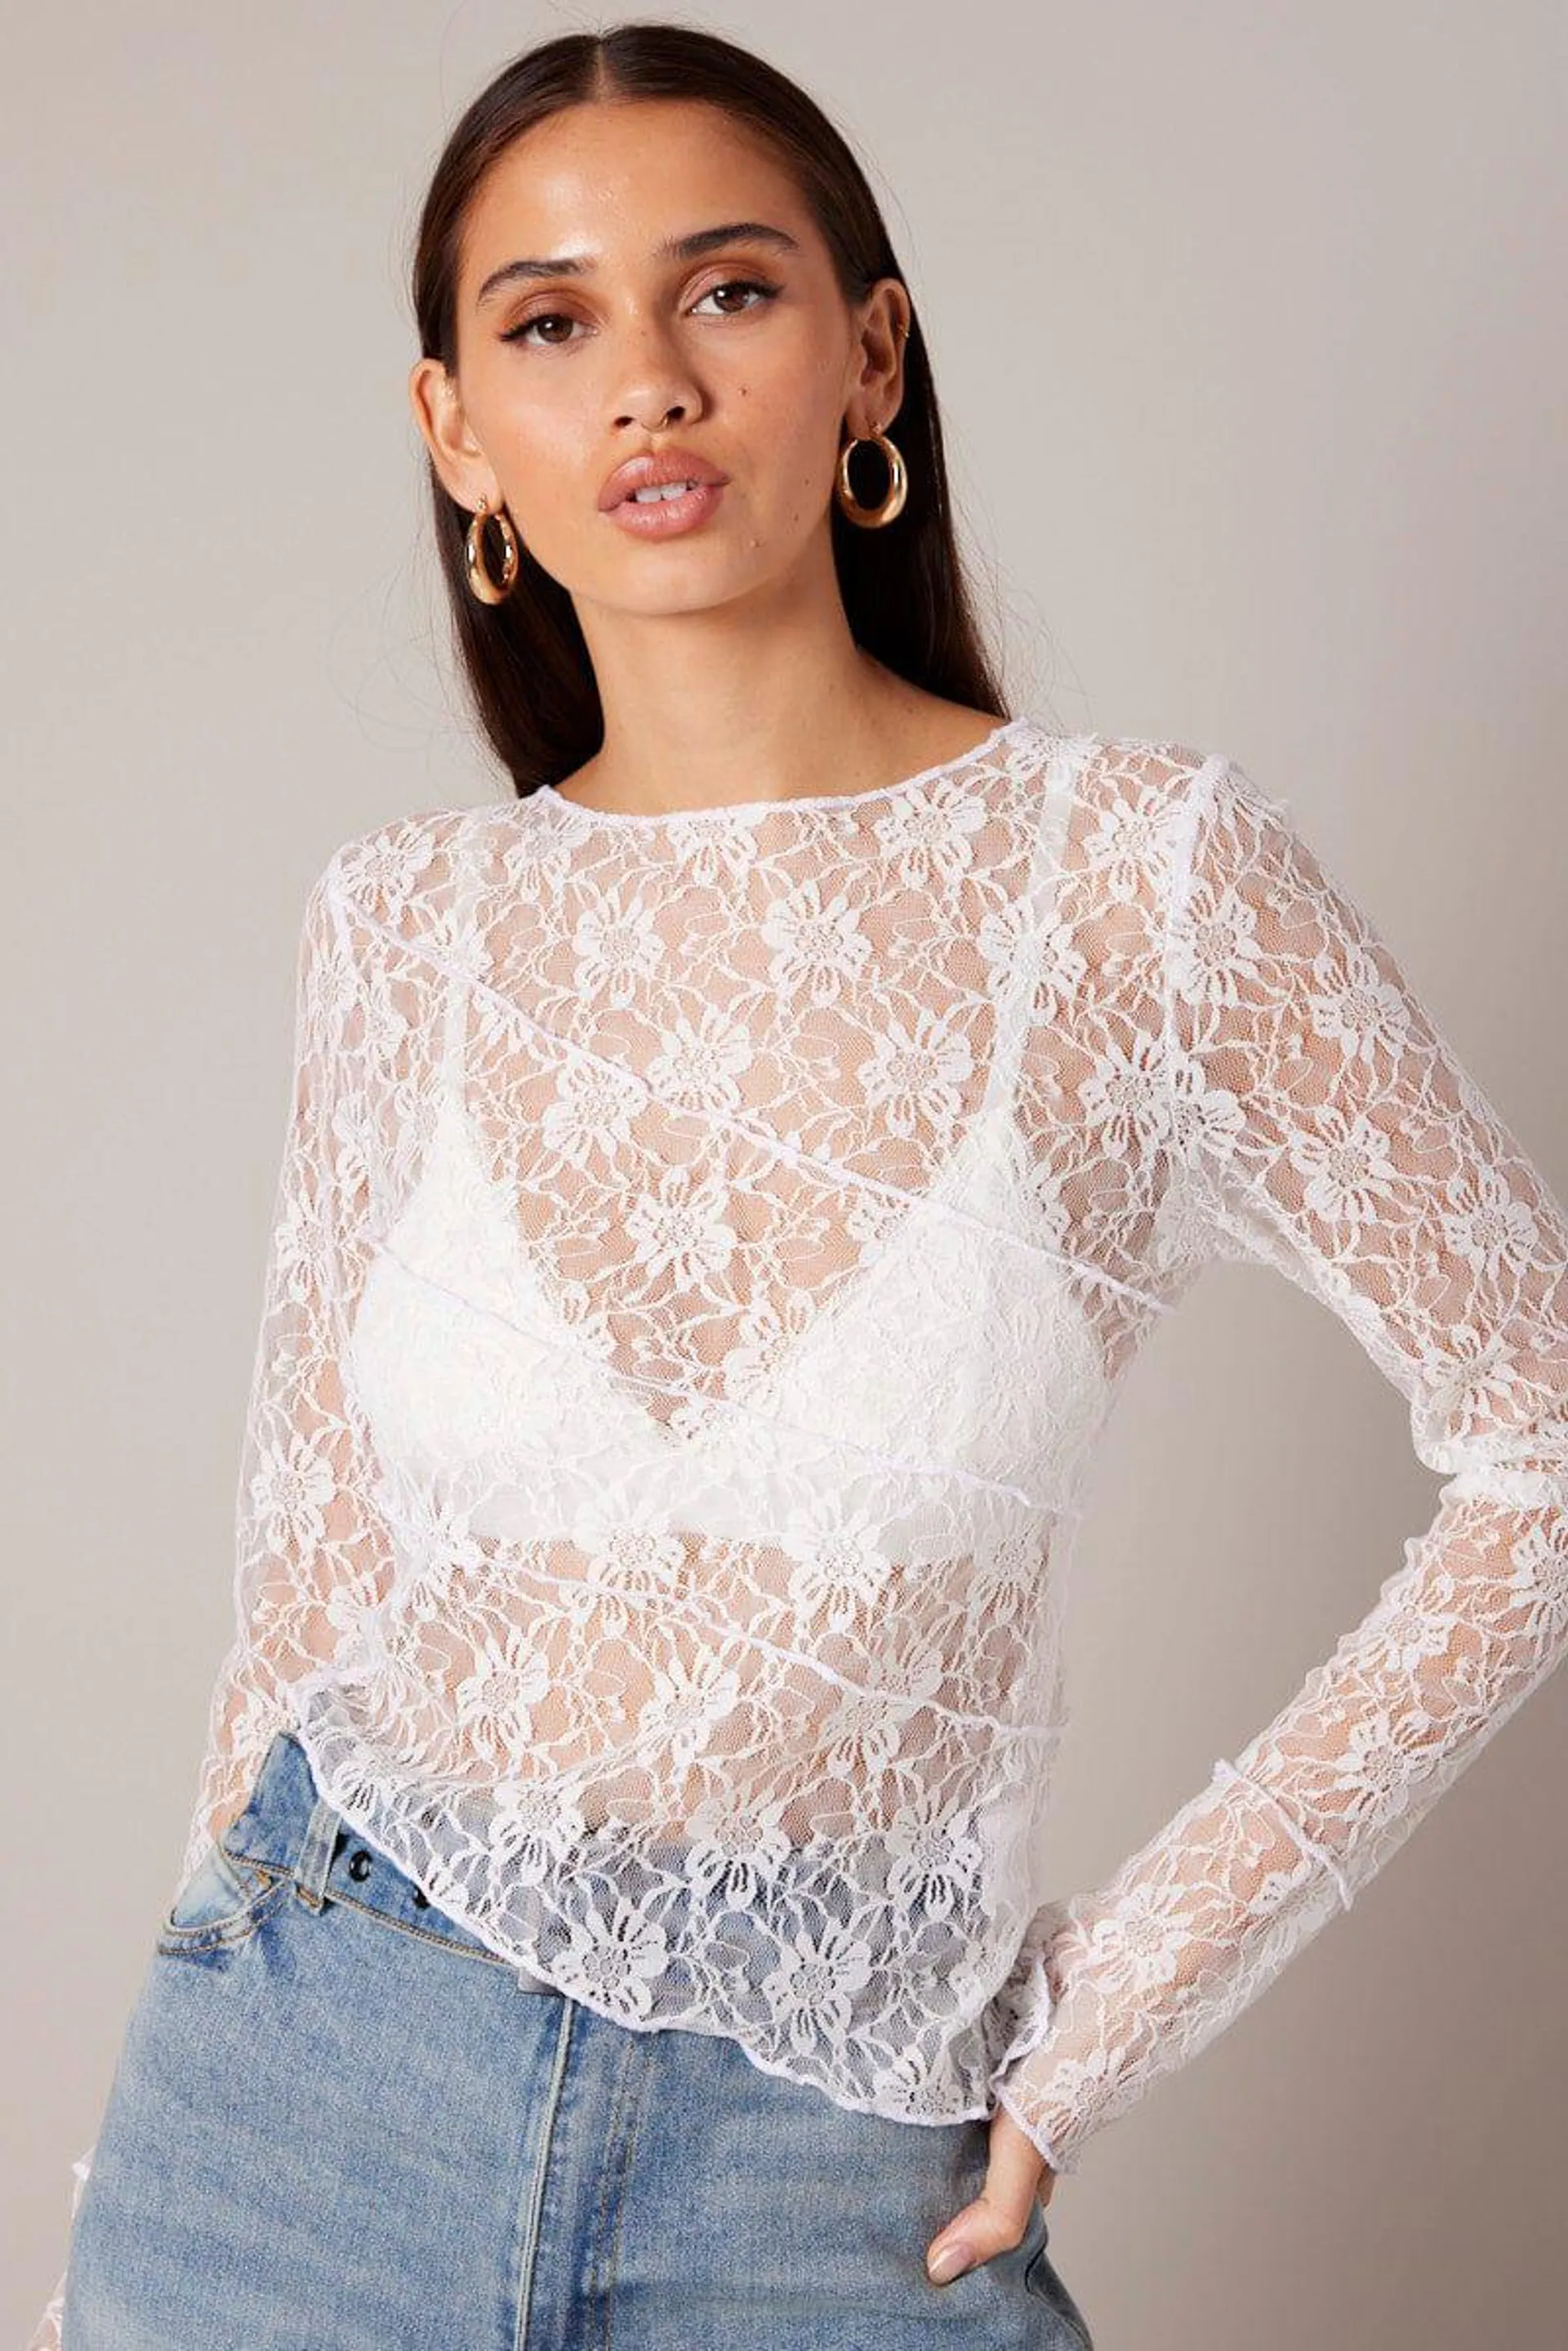 White Lace Top Long Sleeve